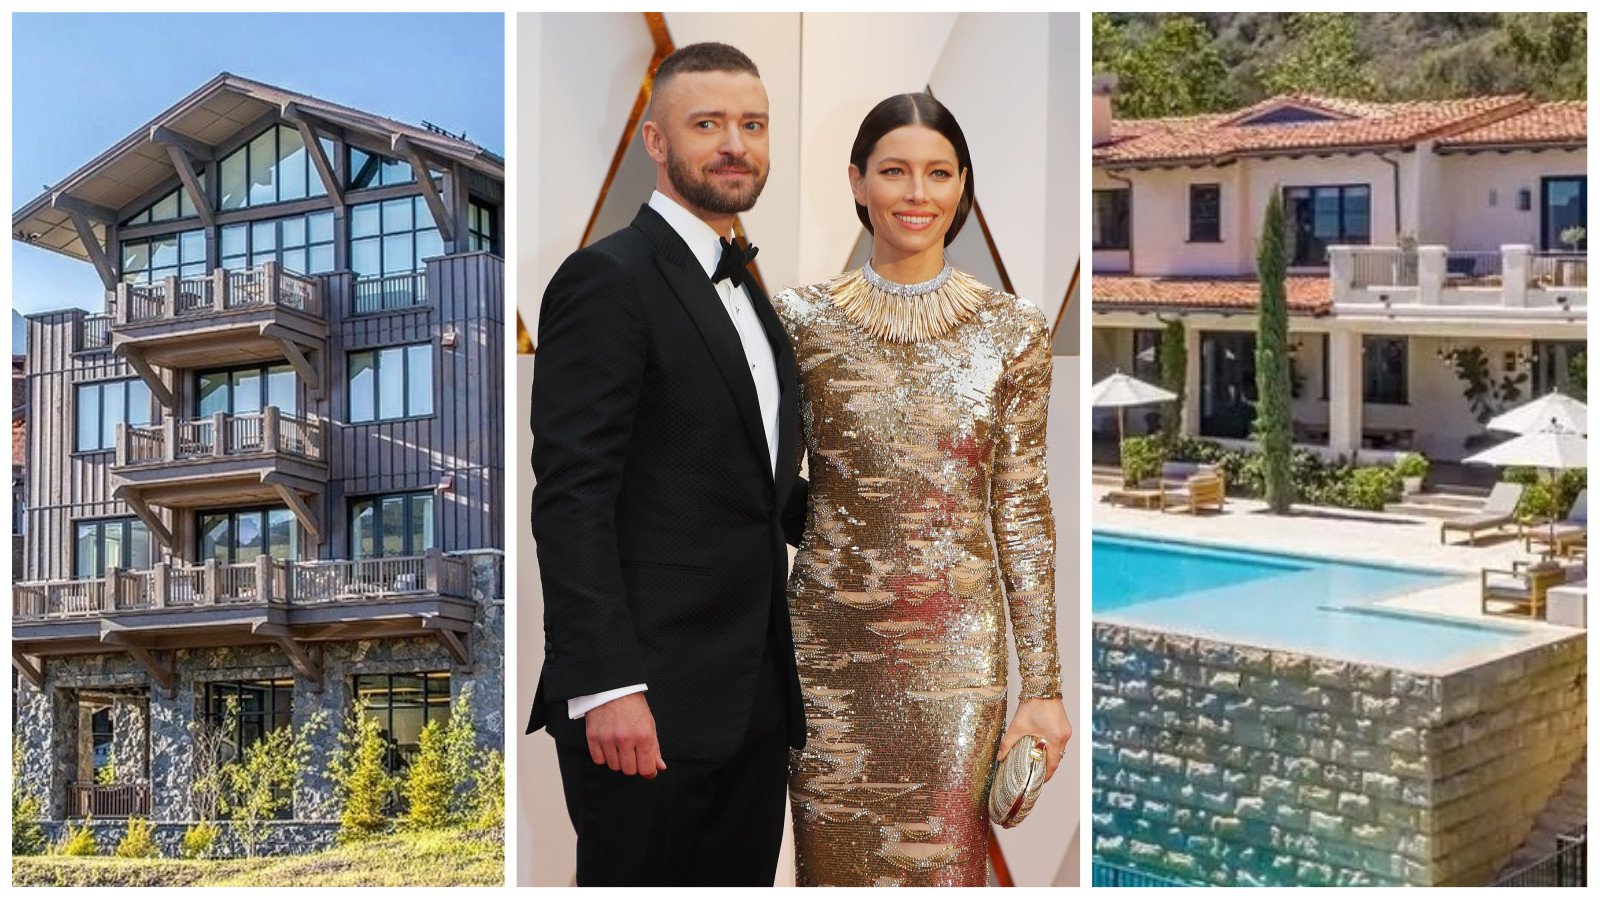 Justin Timberlake and Jessica Biel have several multi-million-dollar houses but are selling their LA mansion to find somewhere quieter and rural for their family to grow up in. Photos: @yellowstoneclub/Instagram, Reuters, realtor.com